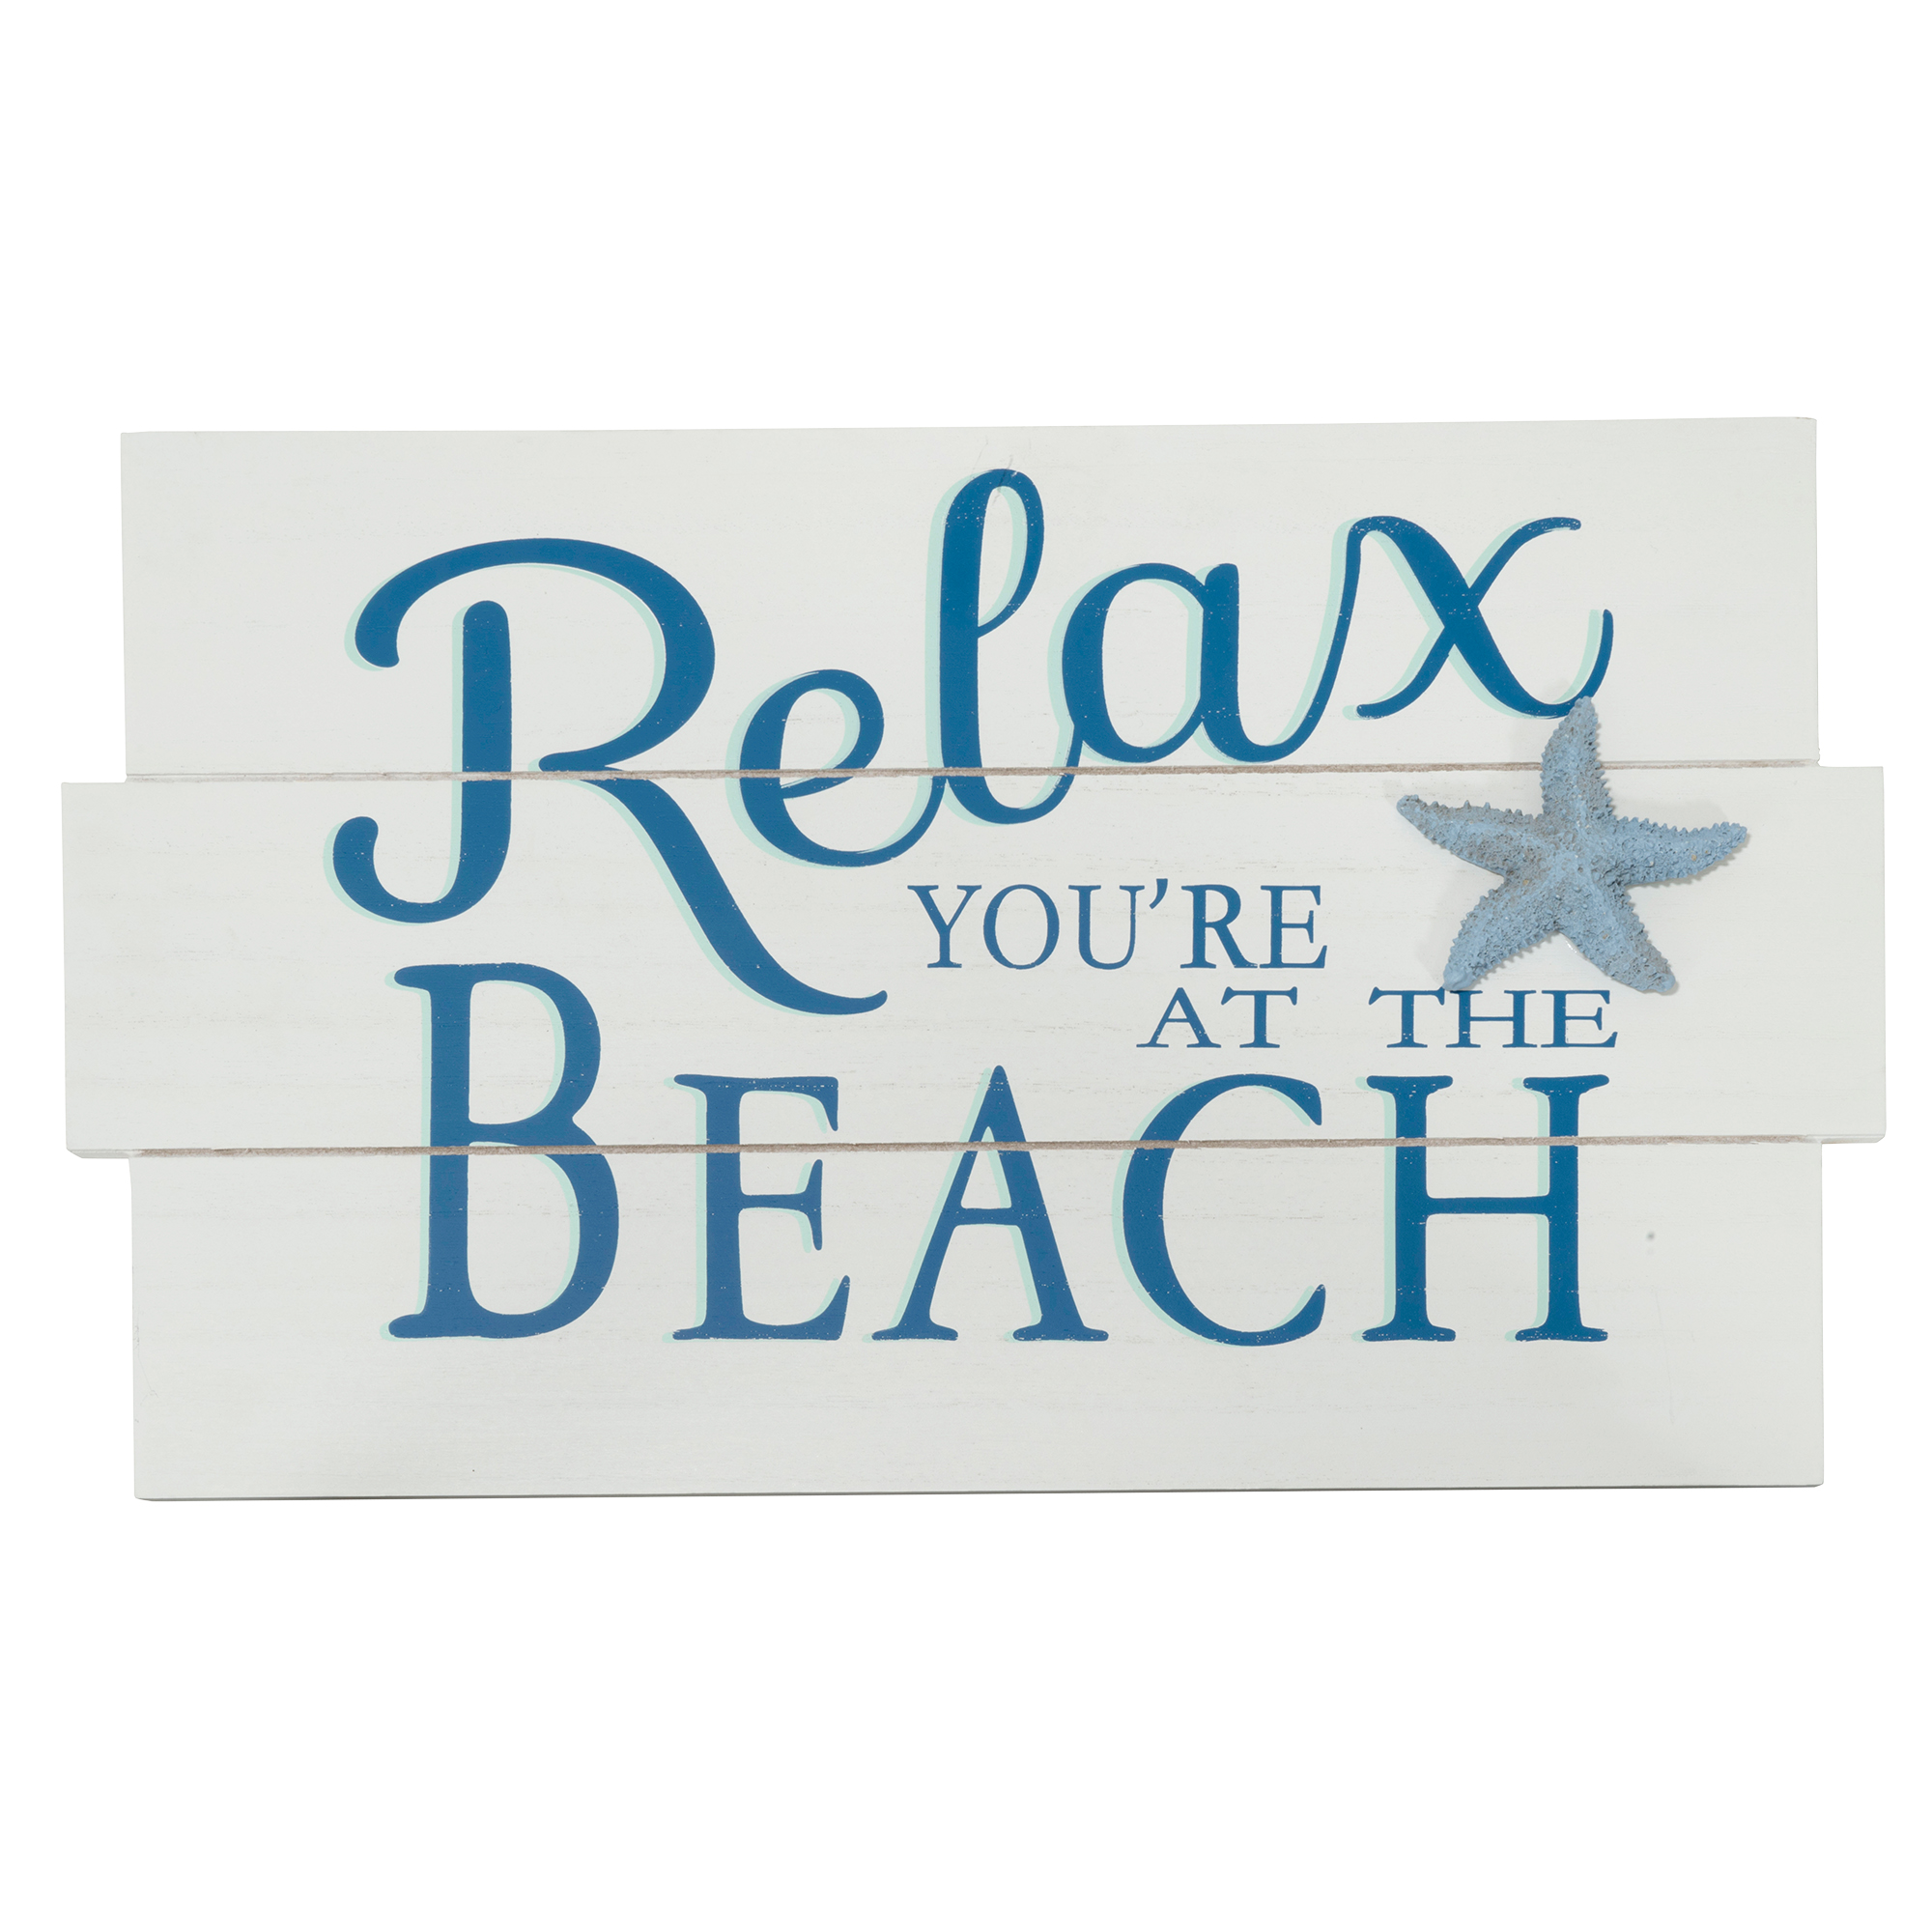 "Relax You're at the Beach" Wooden Wall Decor